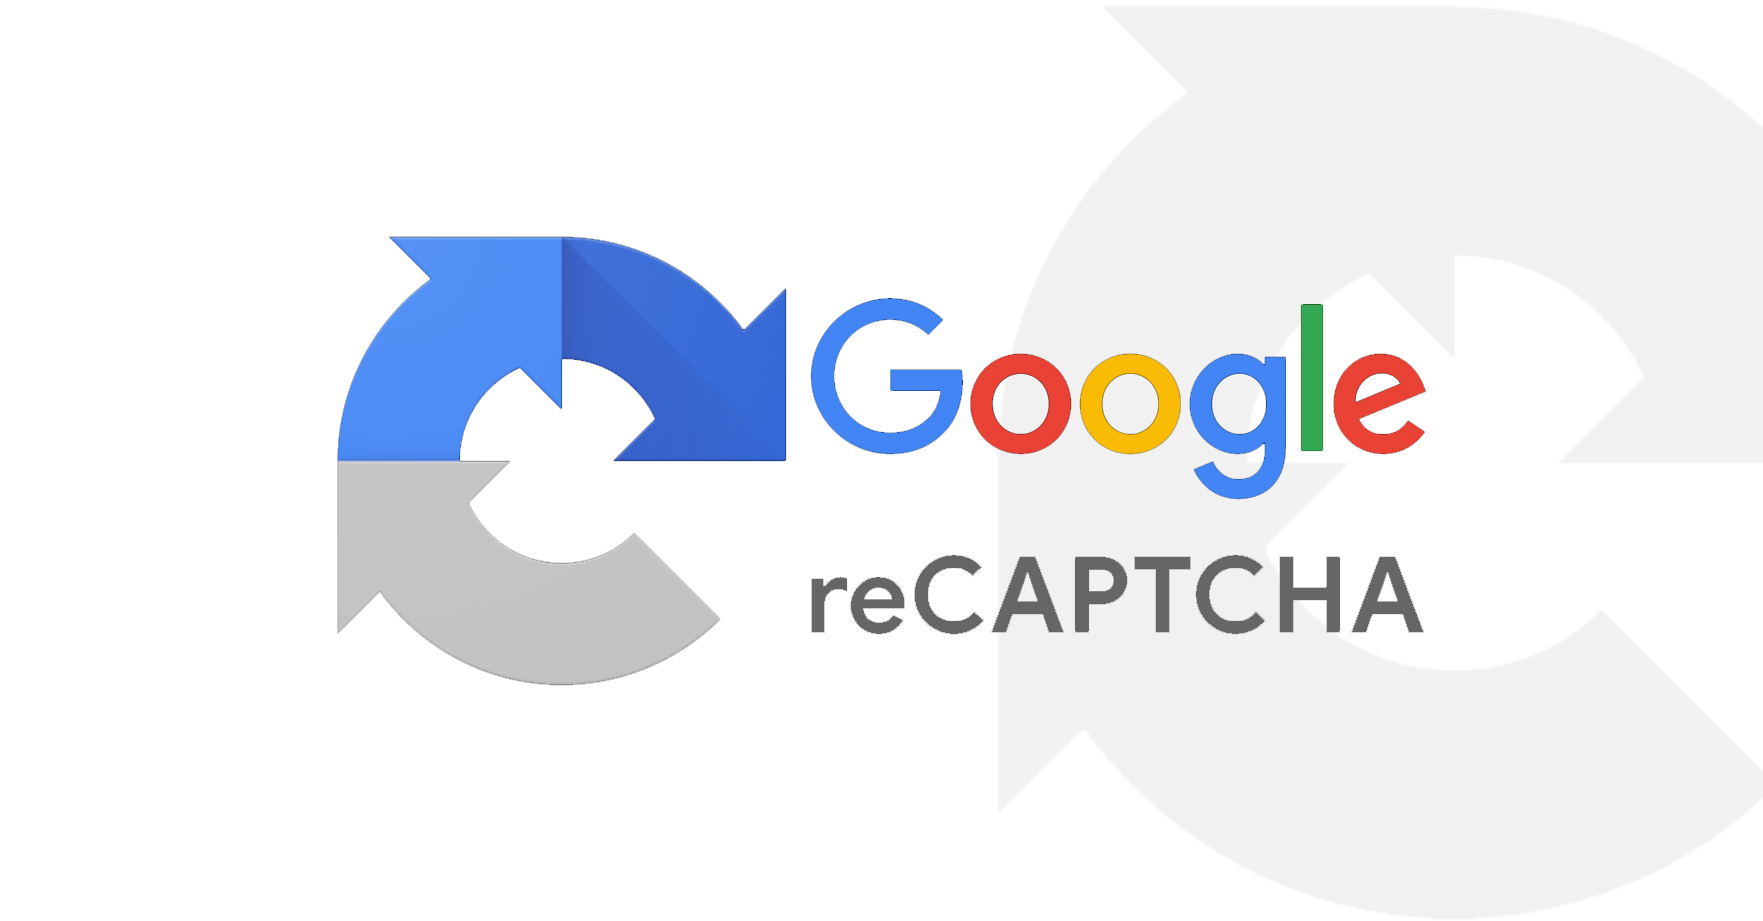 Рекапча гугл. Капча от гугл. RECAPTCHA 2.0. RECAPTCHA от гугл. Рекапча 3.